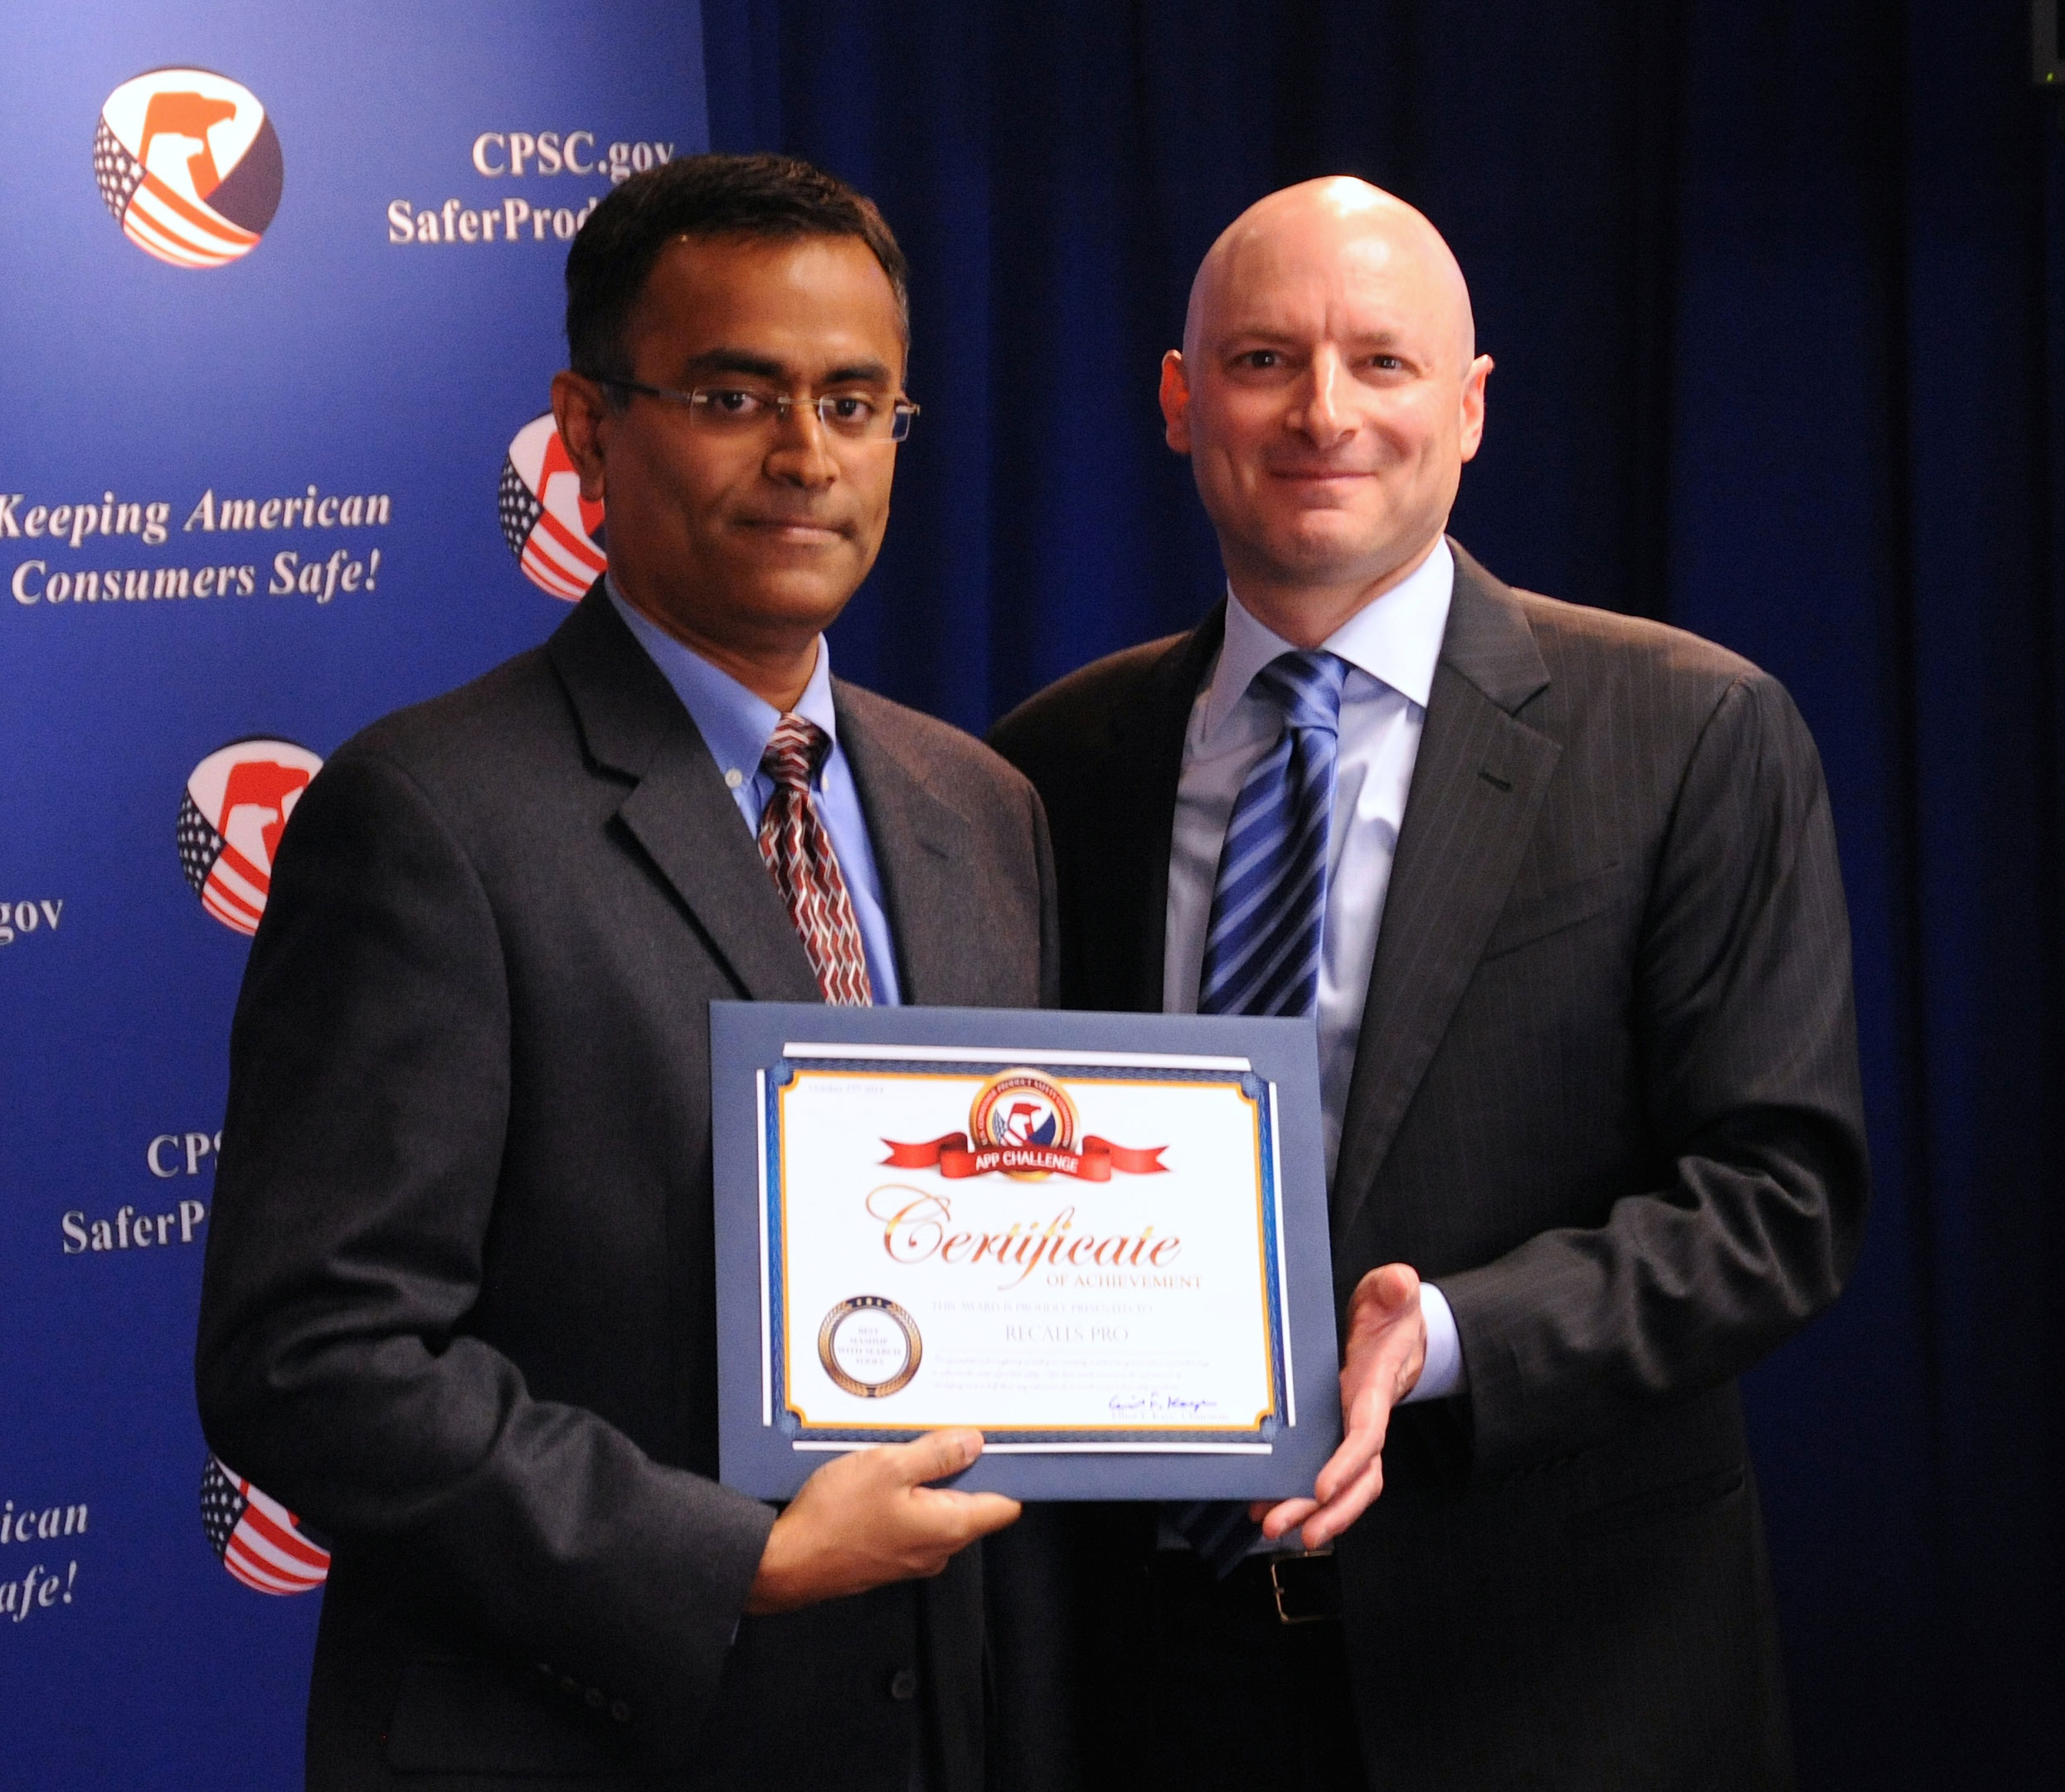 Zech Kottilil receives his certificate from Chairman Kaye. Zech won “Best Mashup with Search Tools” category for his Recall Pro app.